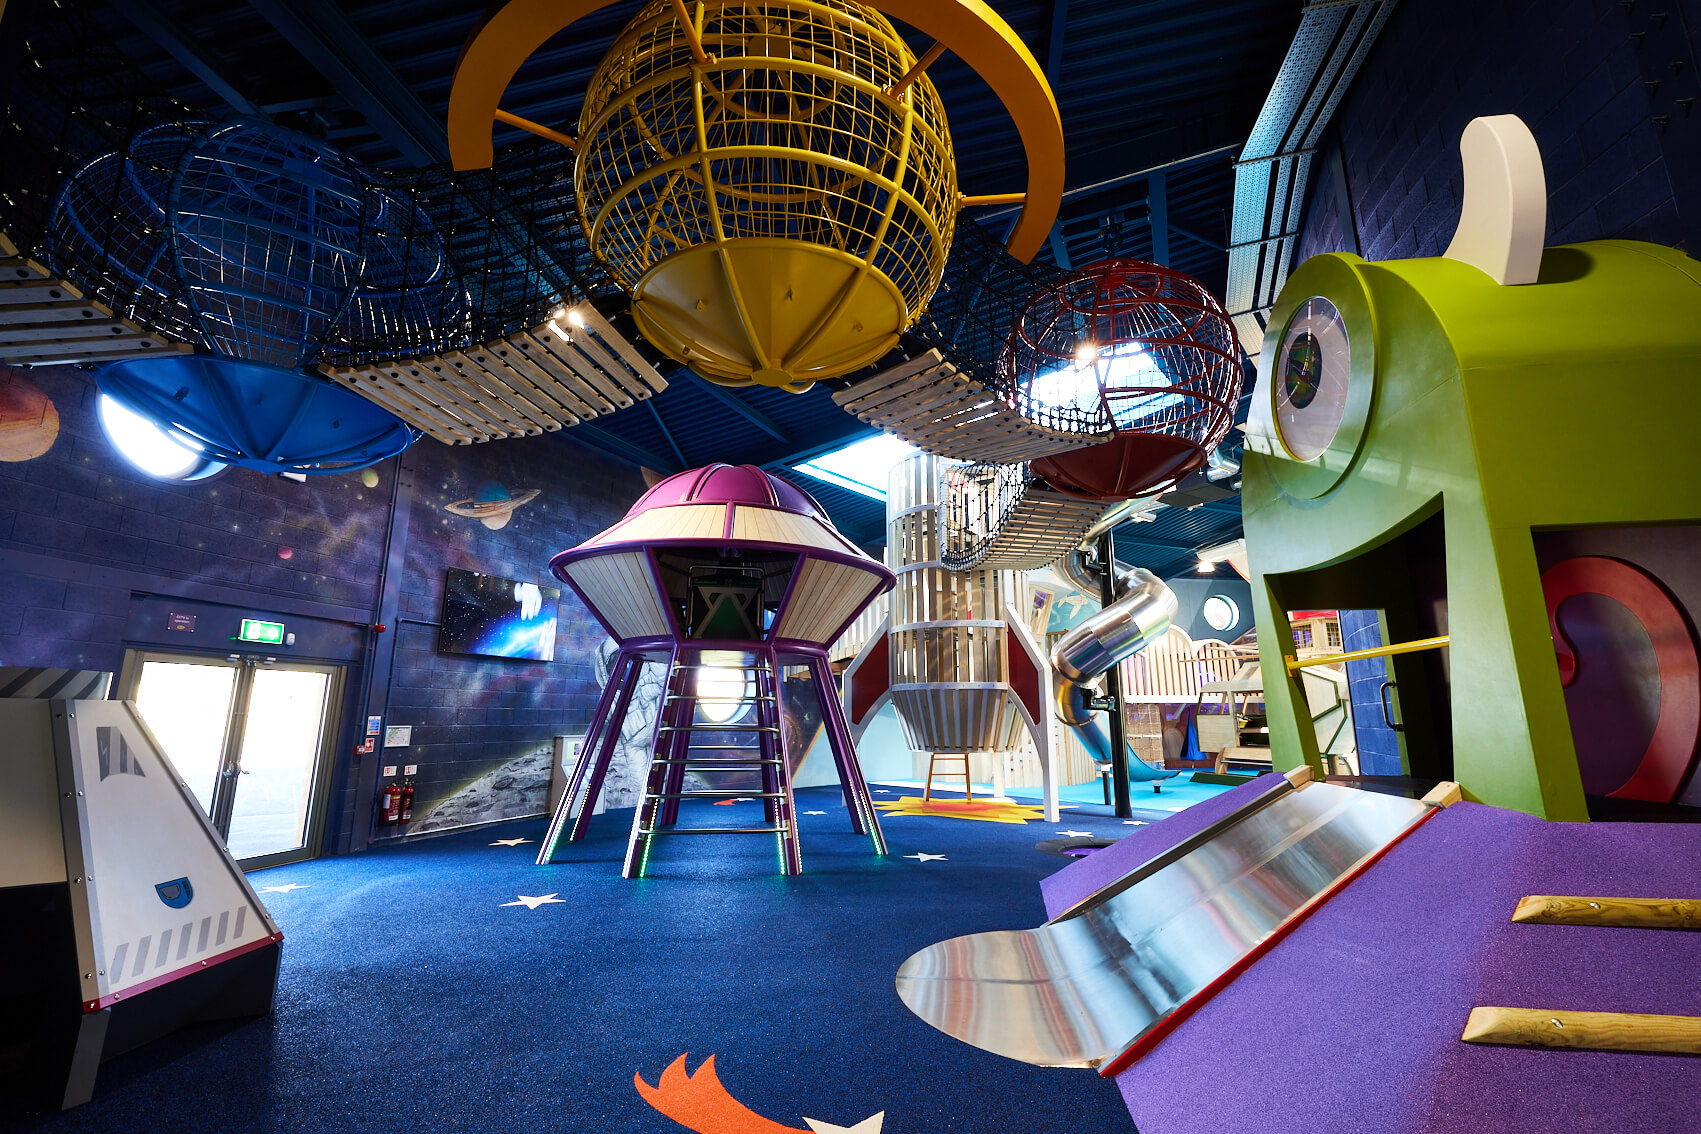 UFO, Alien, rocket and suspended planets in Playhive space zone, indoor play centre